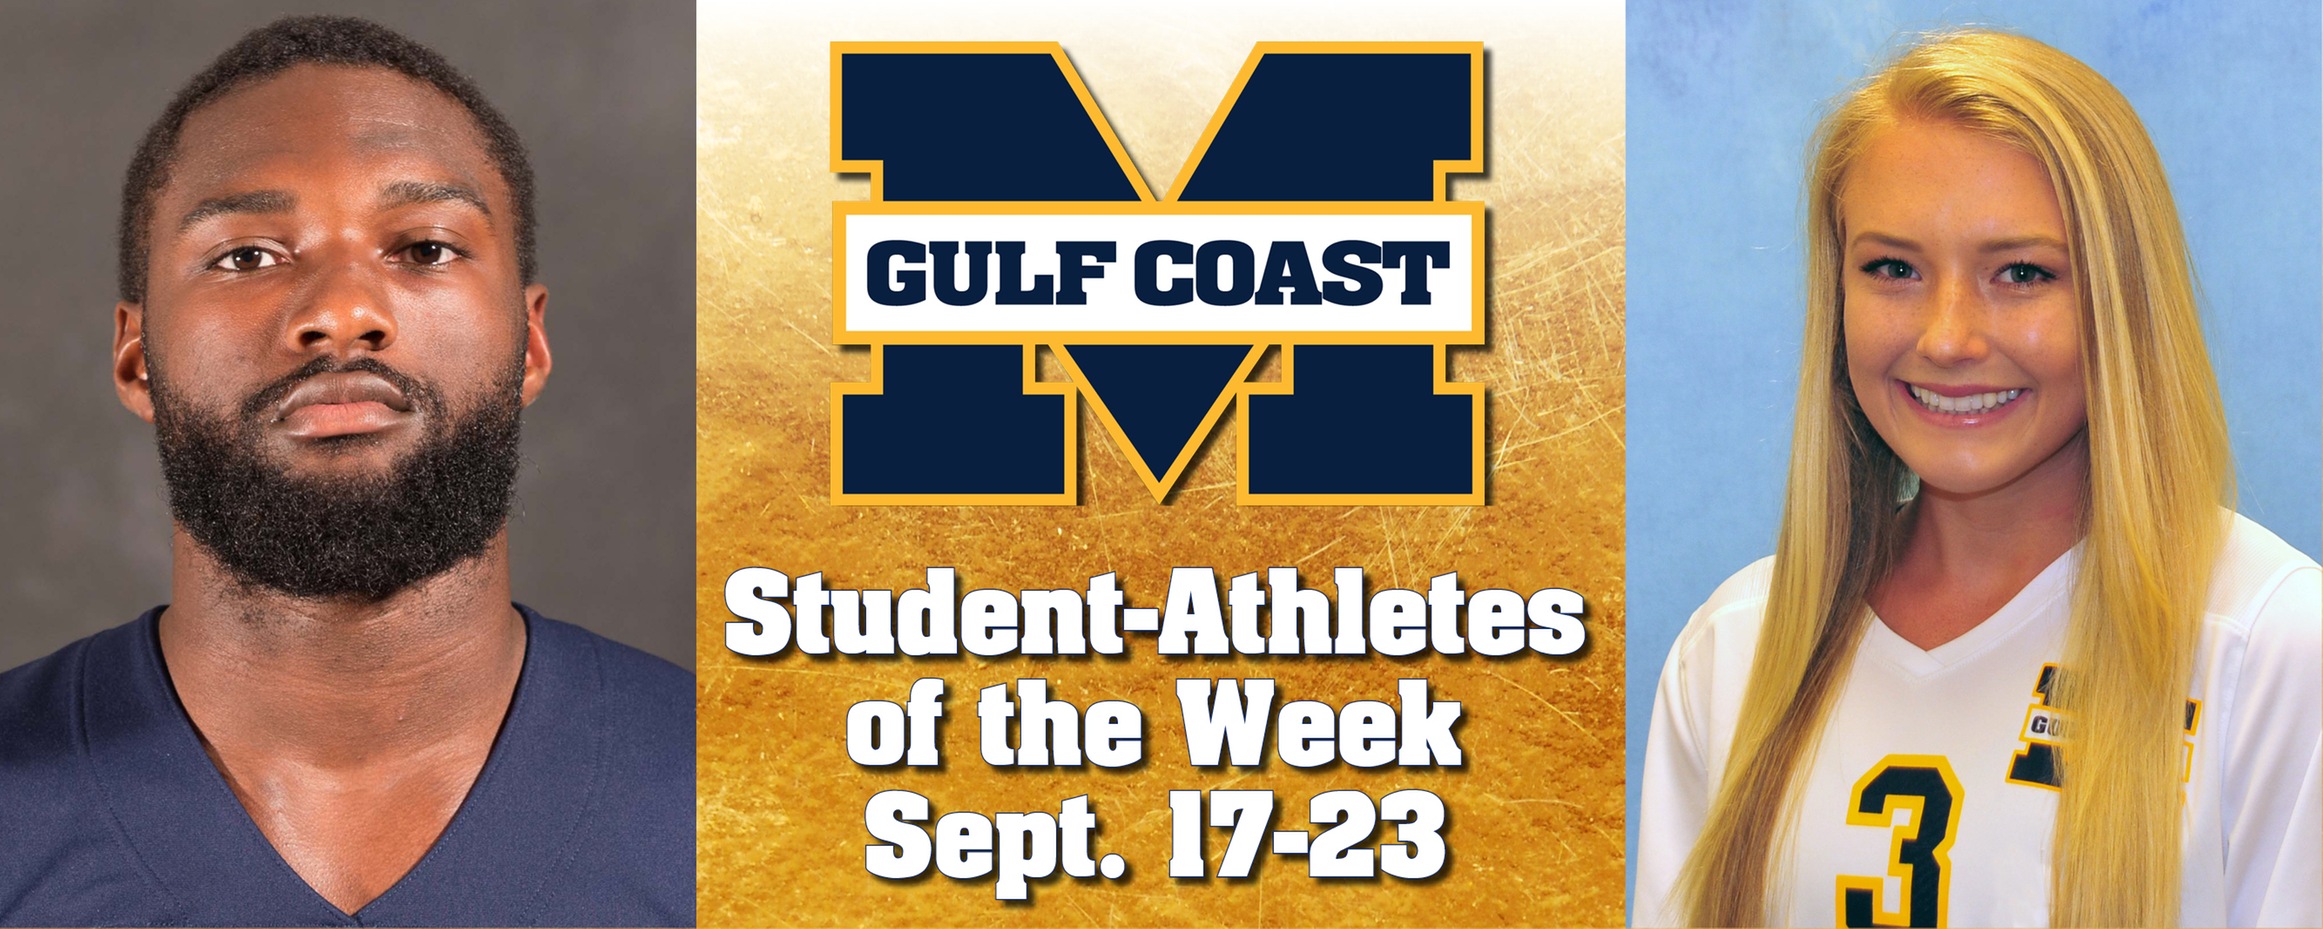 Hearn, Harwell named MGCCC Student-Athletes of the Week